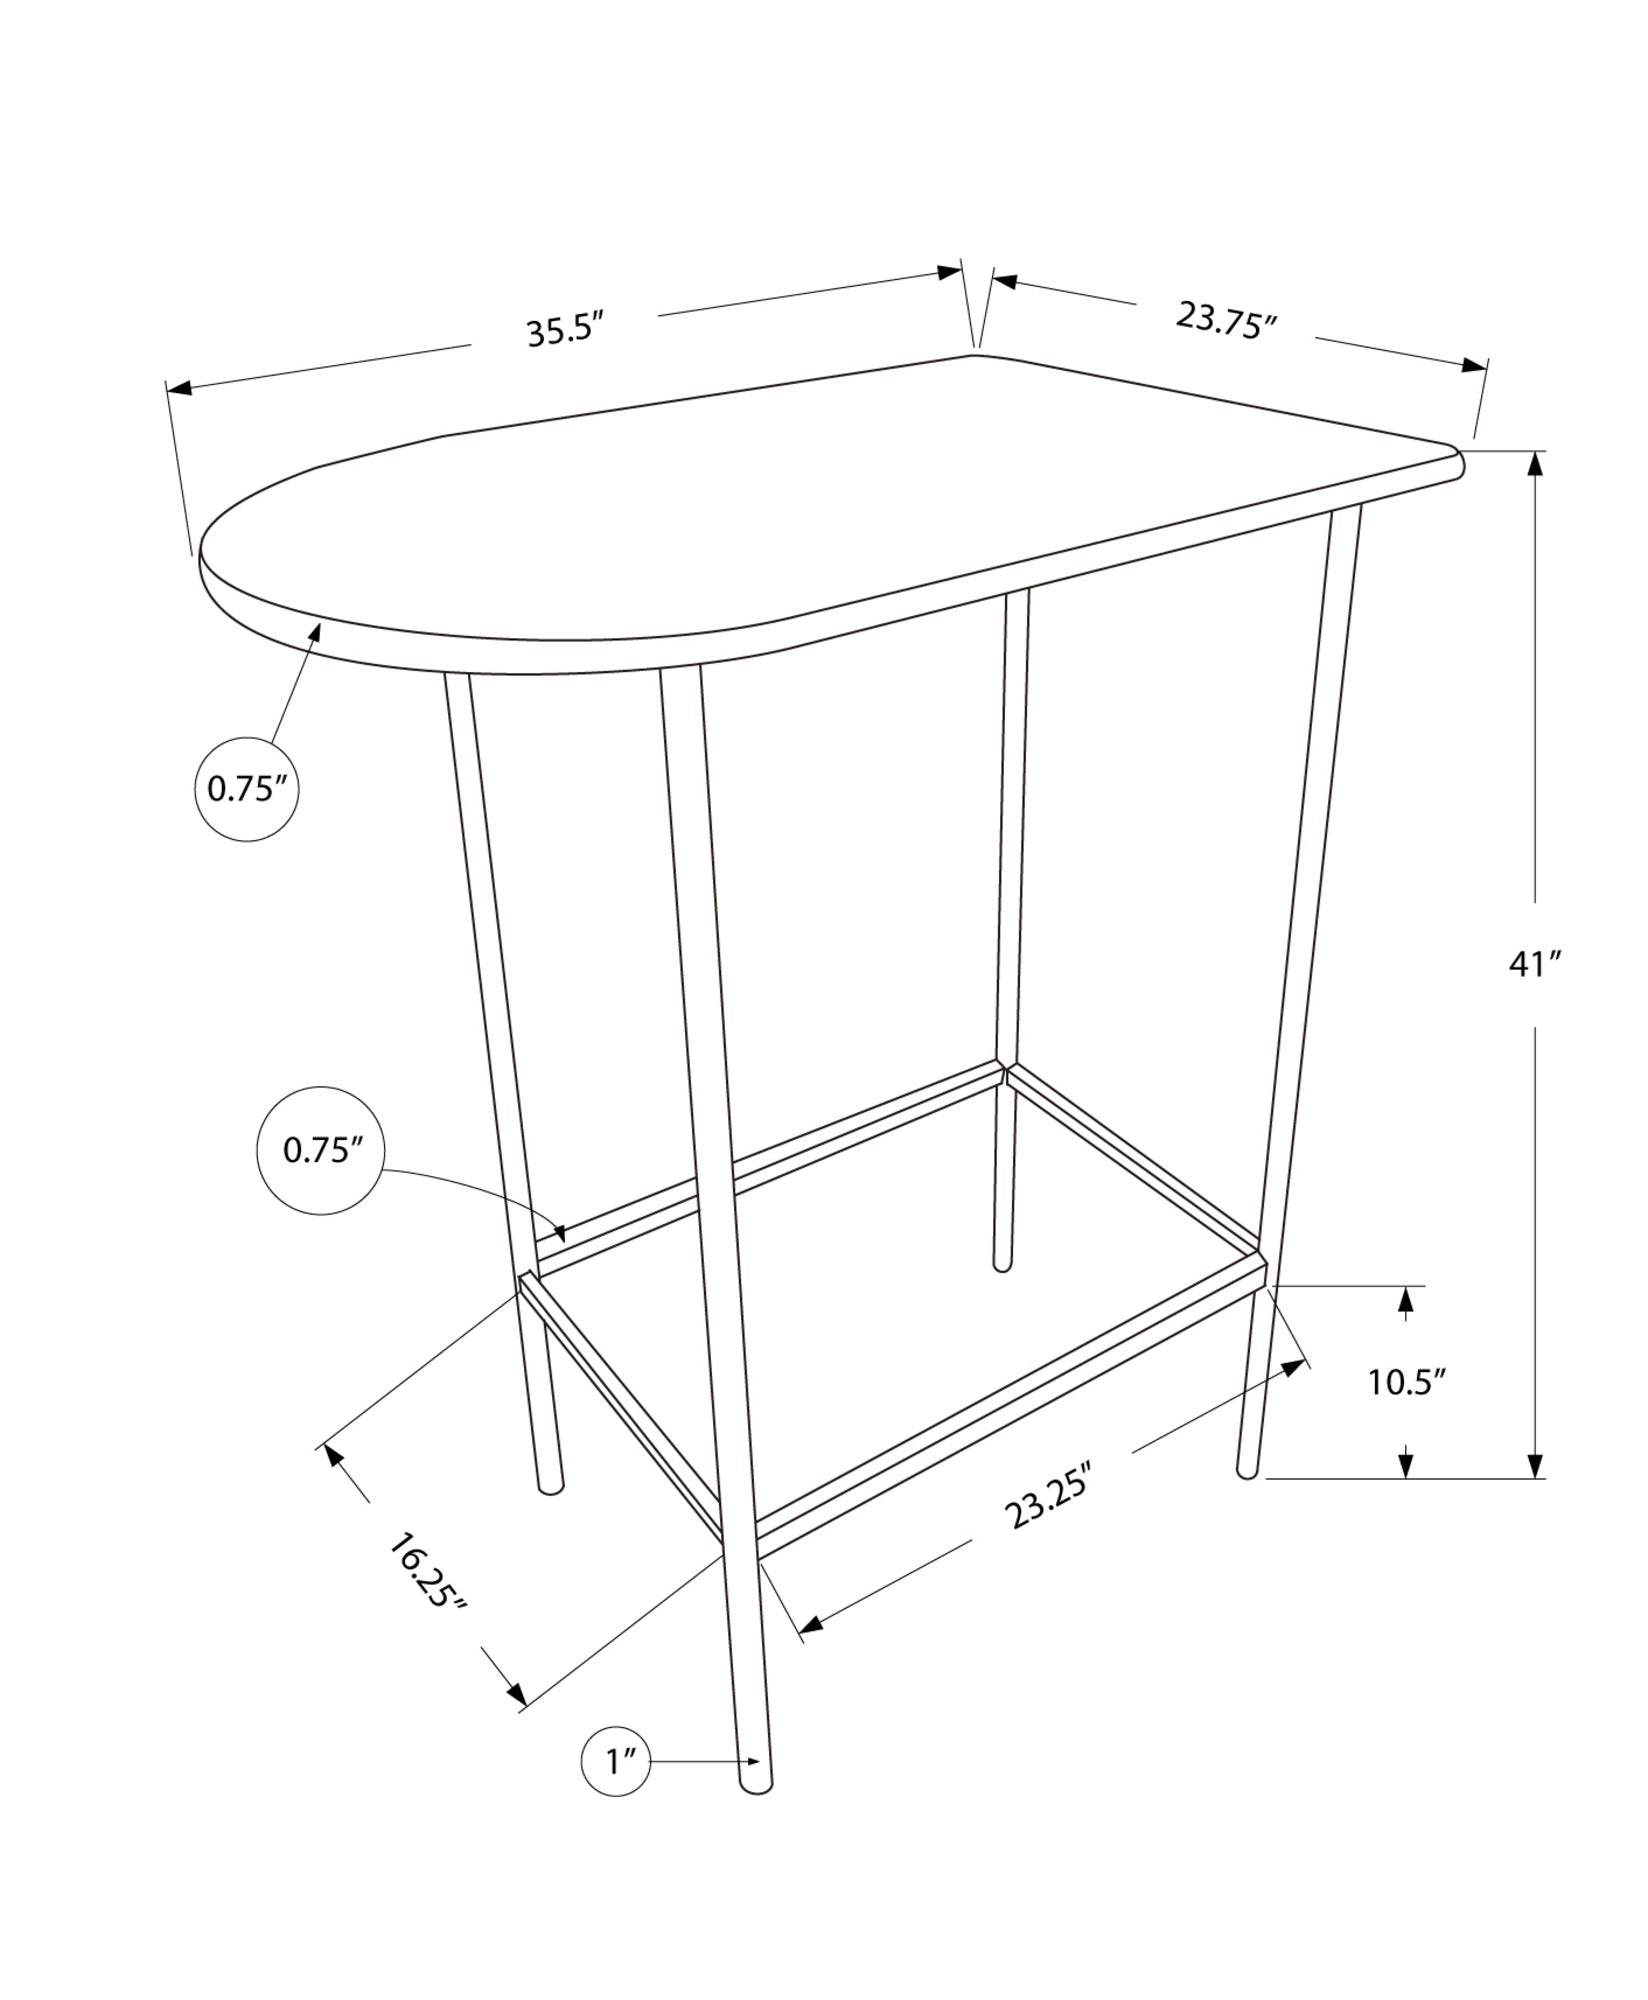 24" White Free Form Manufactured Wood Bar Table